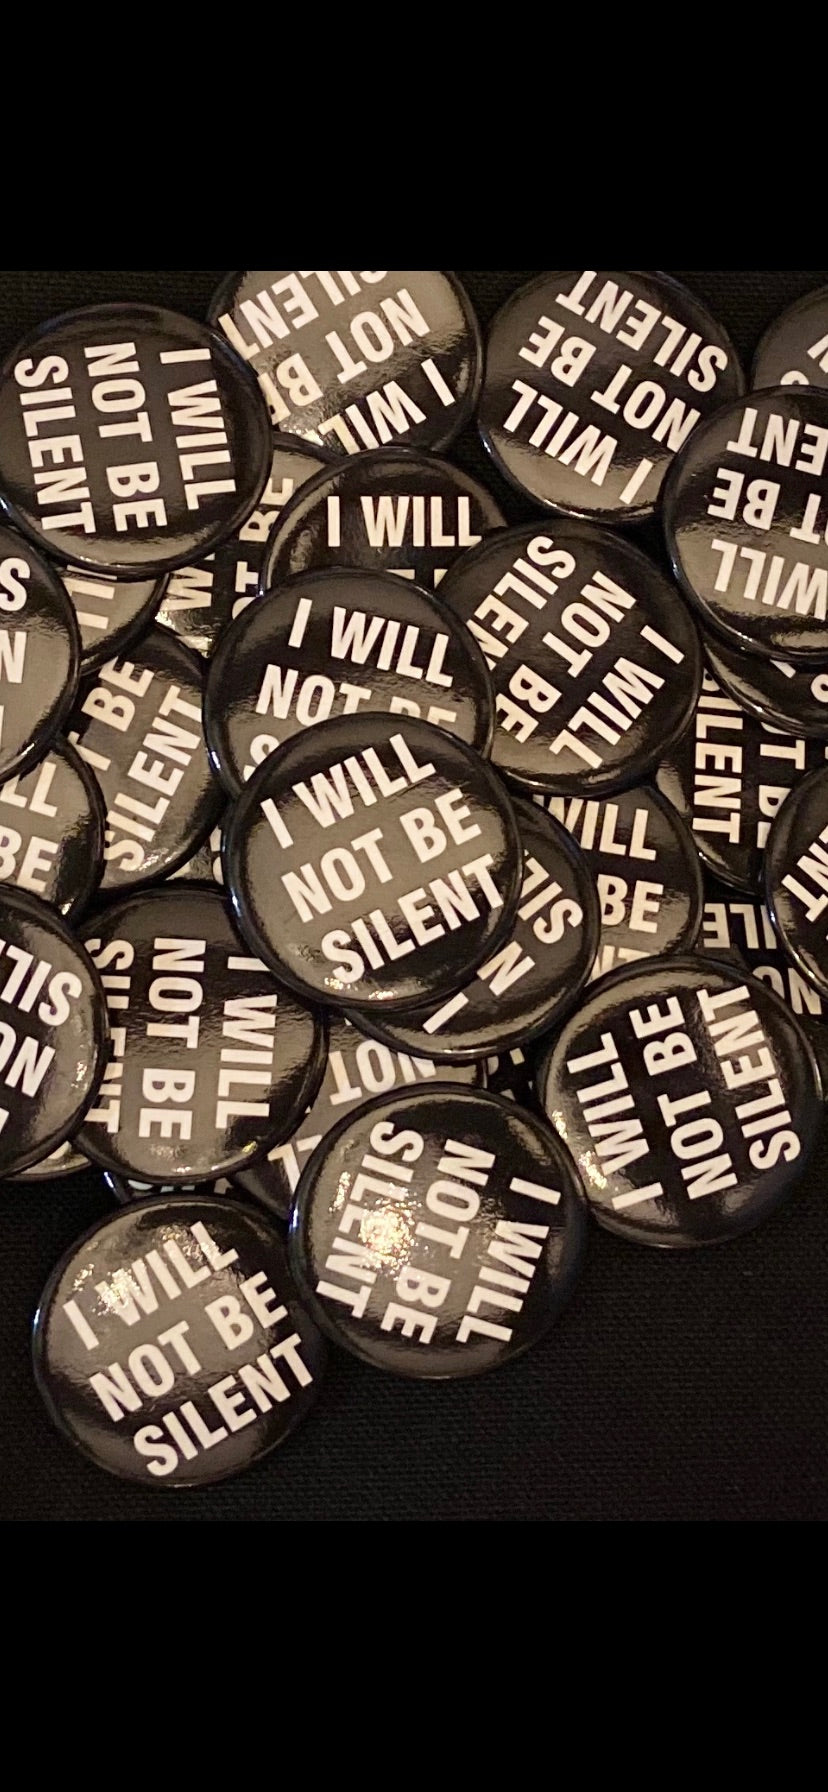 I WILL NOT BE SILENT Button